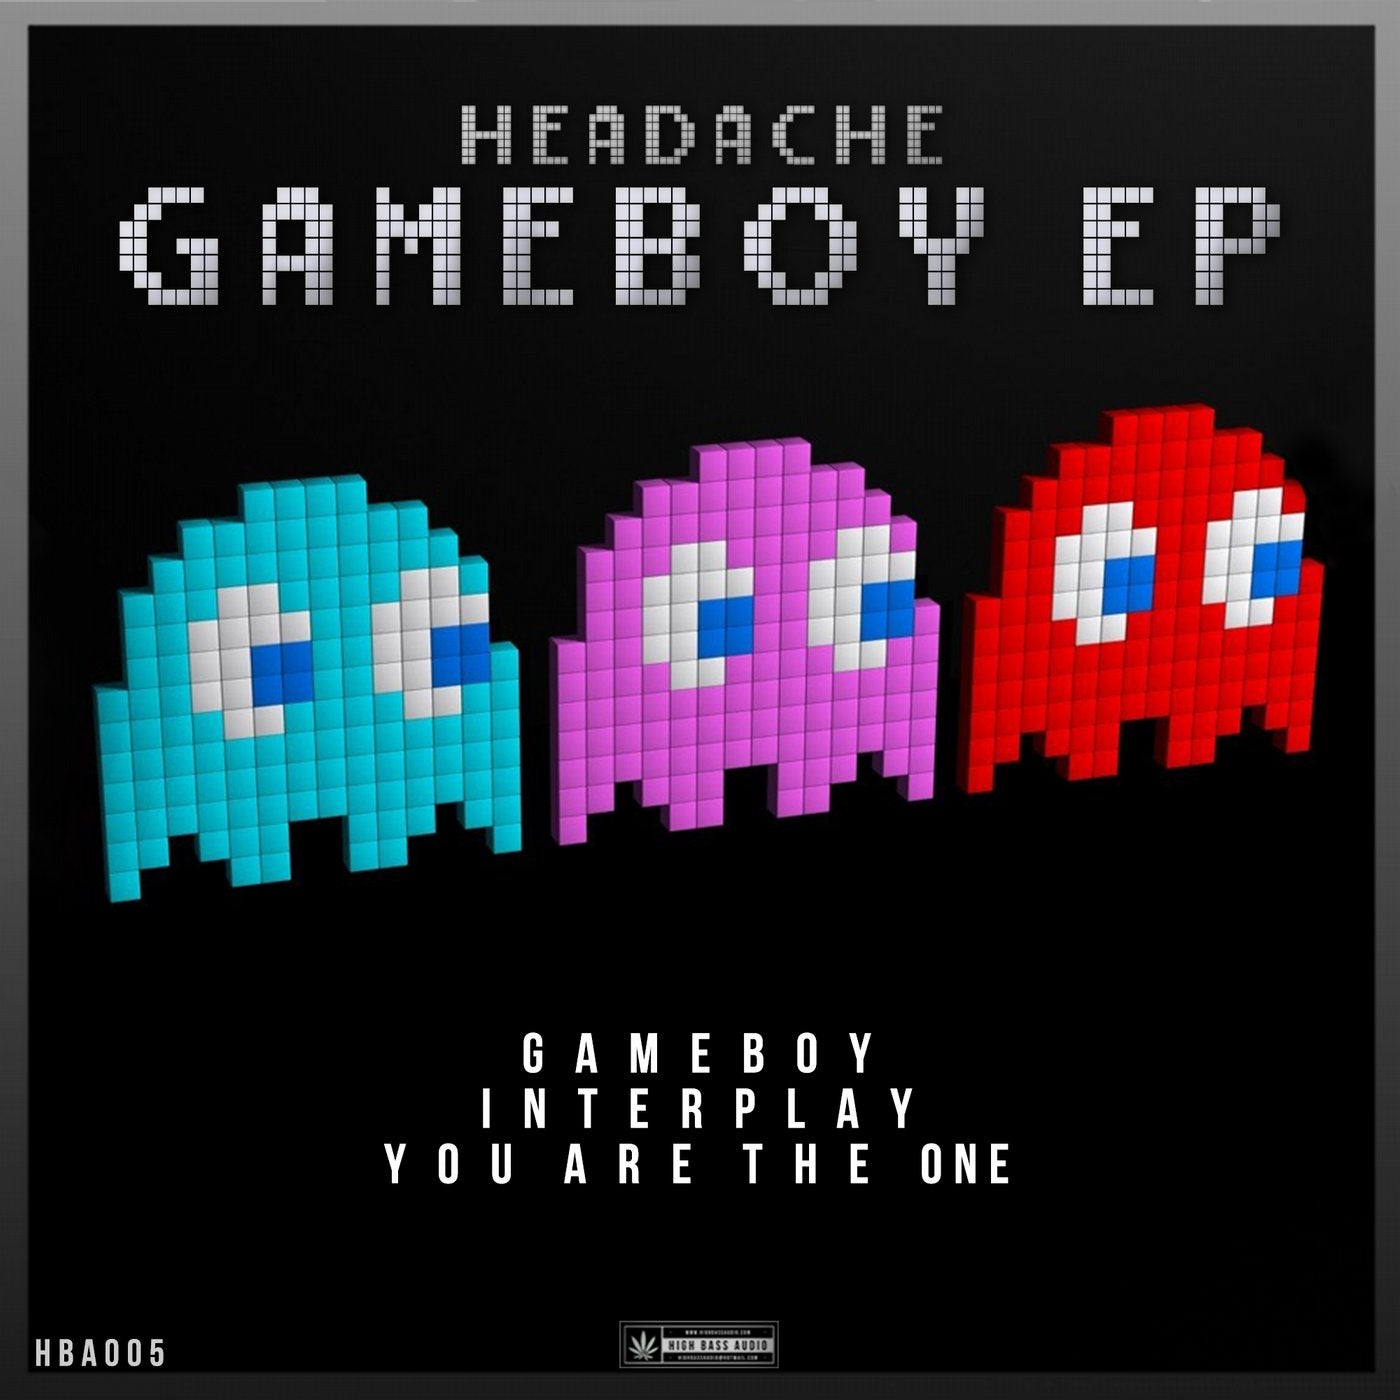 Gameboy/Interplay/You Are The One